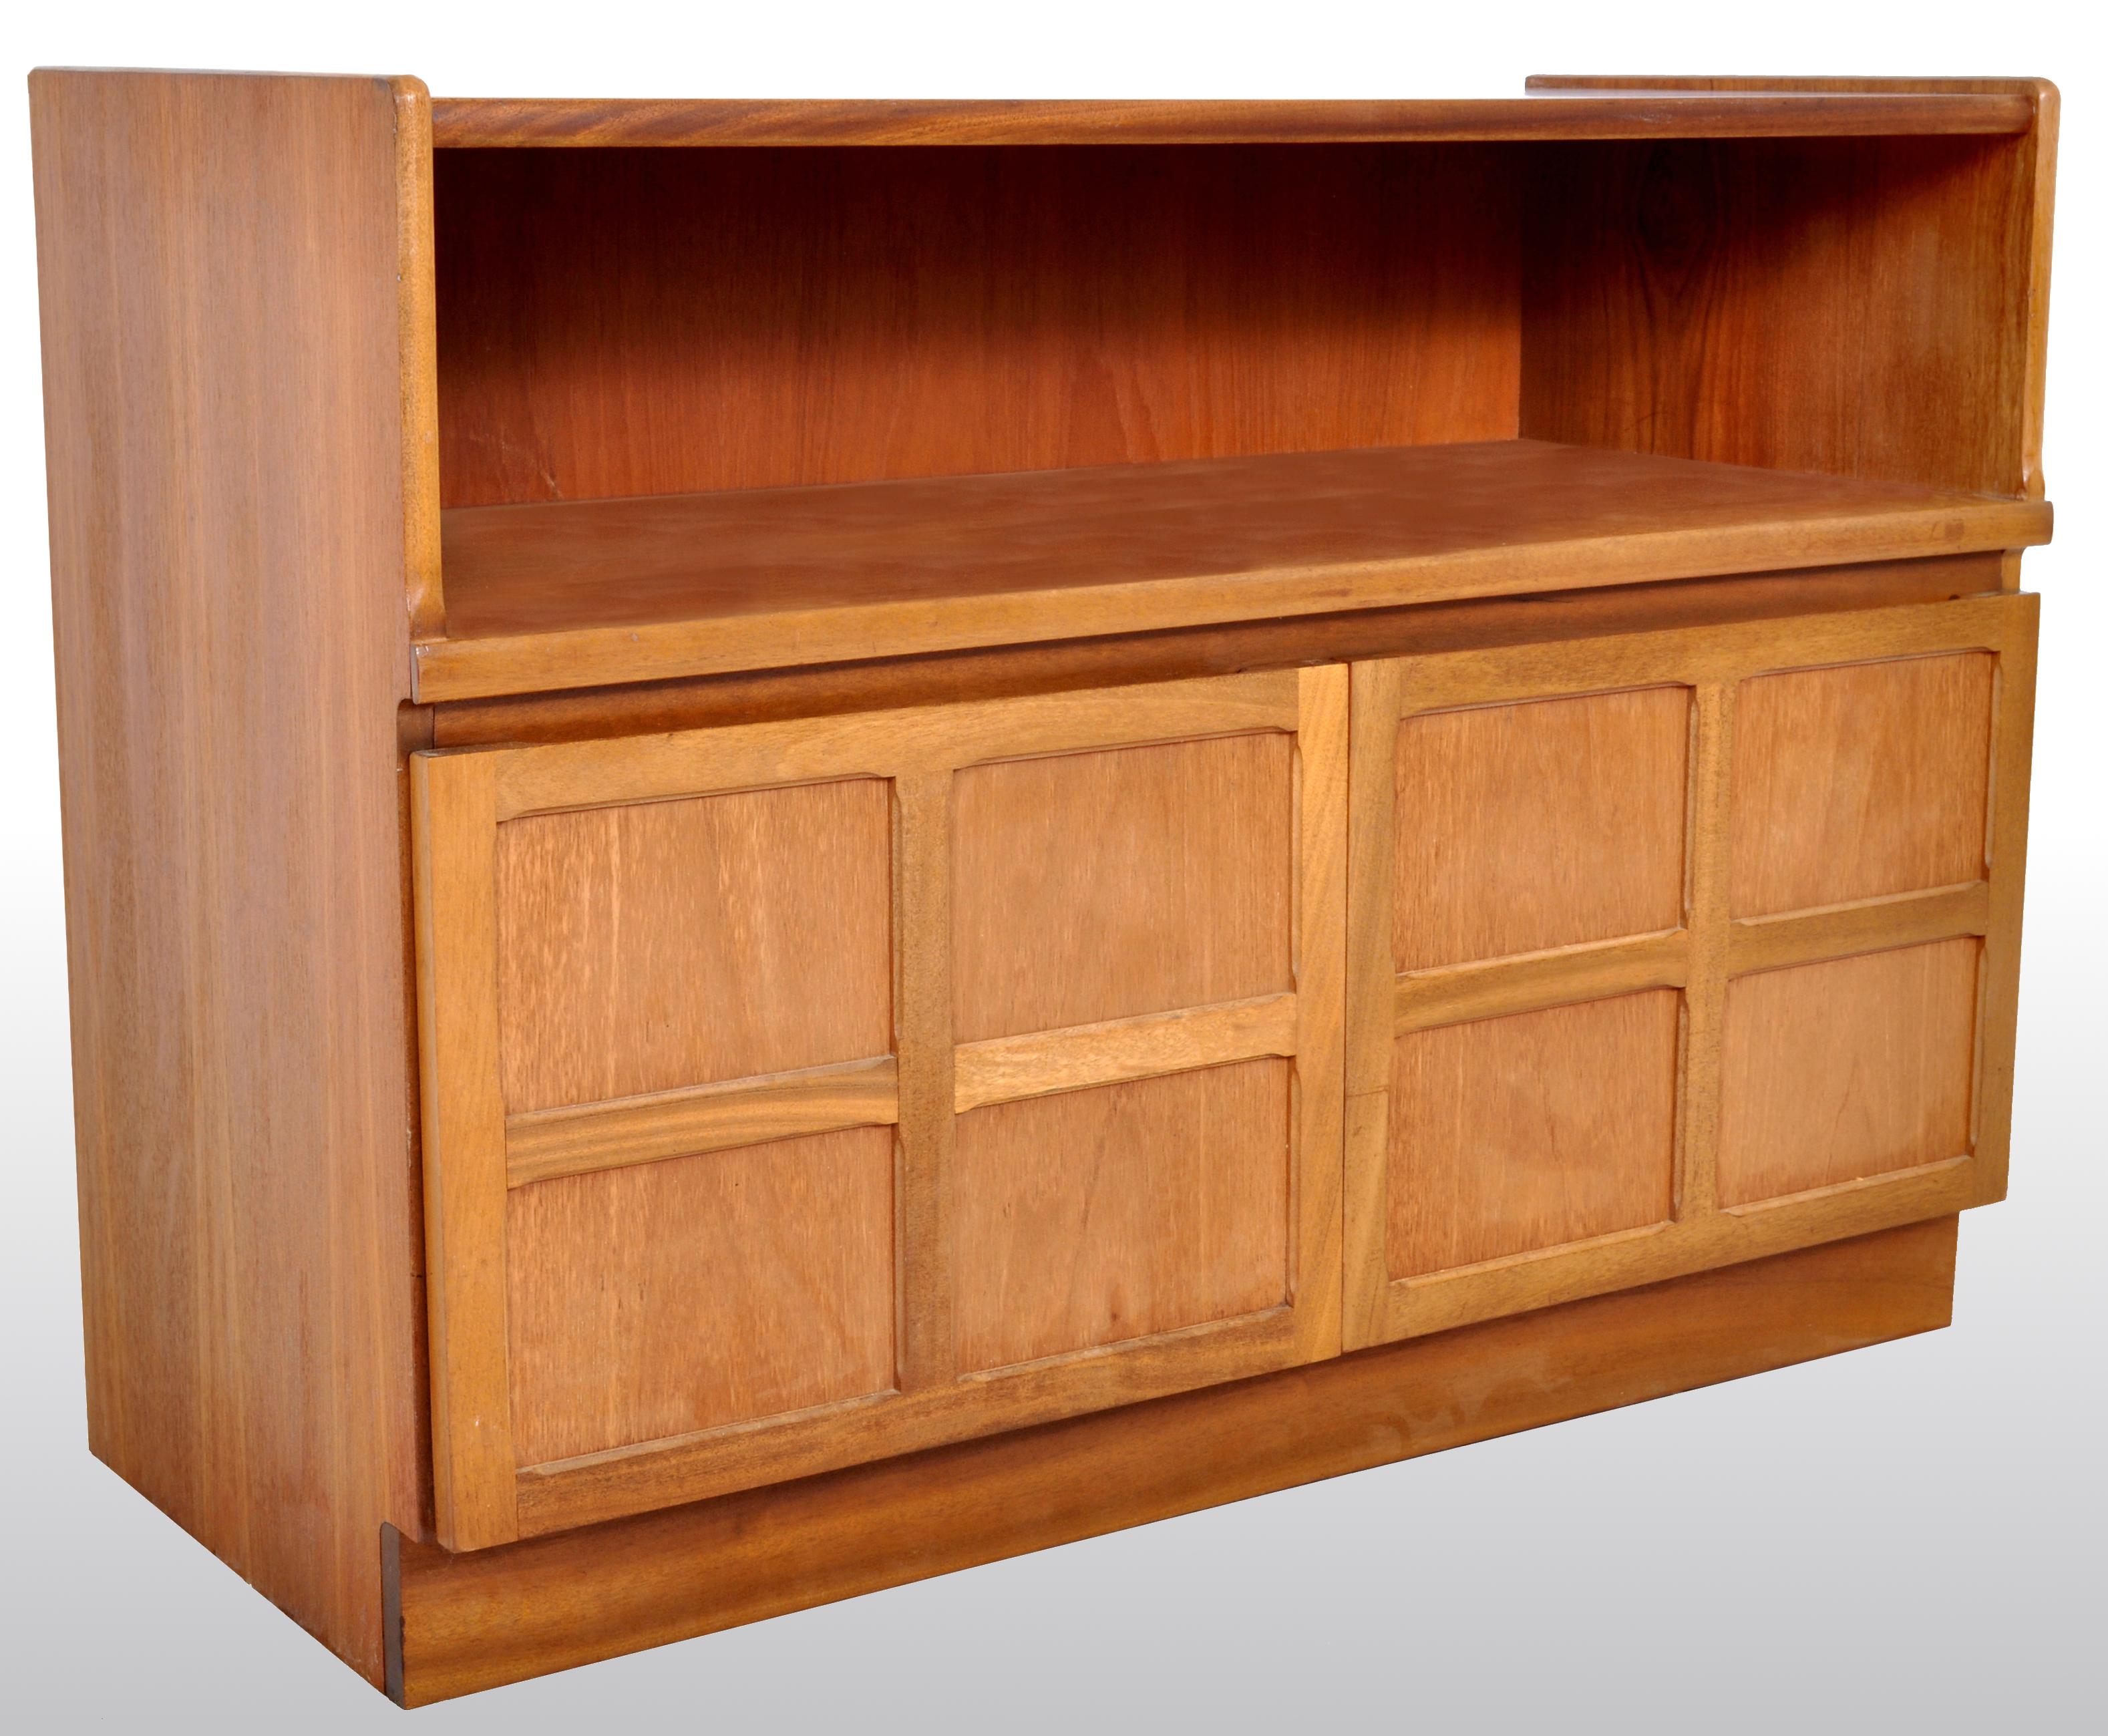 Mid-Century Modern Danish style media cabinet in Teak by Nathan Furniture, 1960s. The cabinet having a recessed cavity above twin paneled cupboard doors and standing on a plinth base. The cabinet bearing the original 